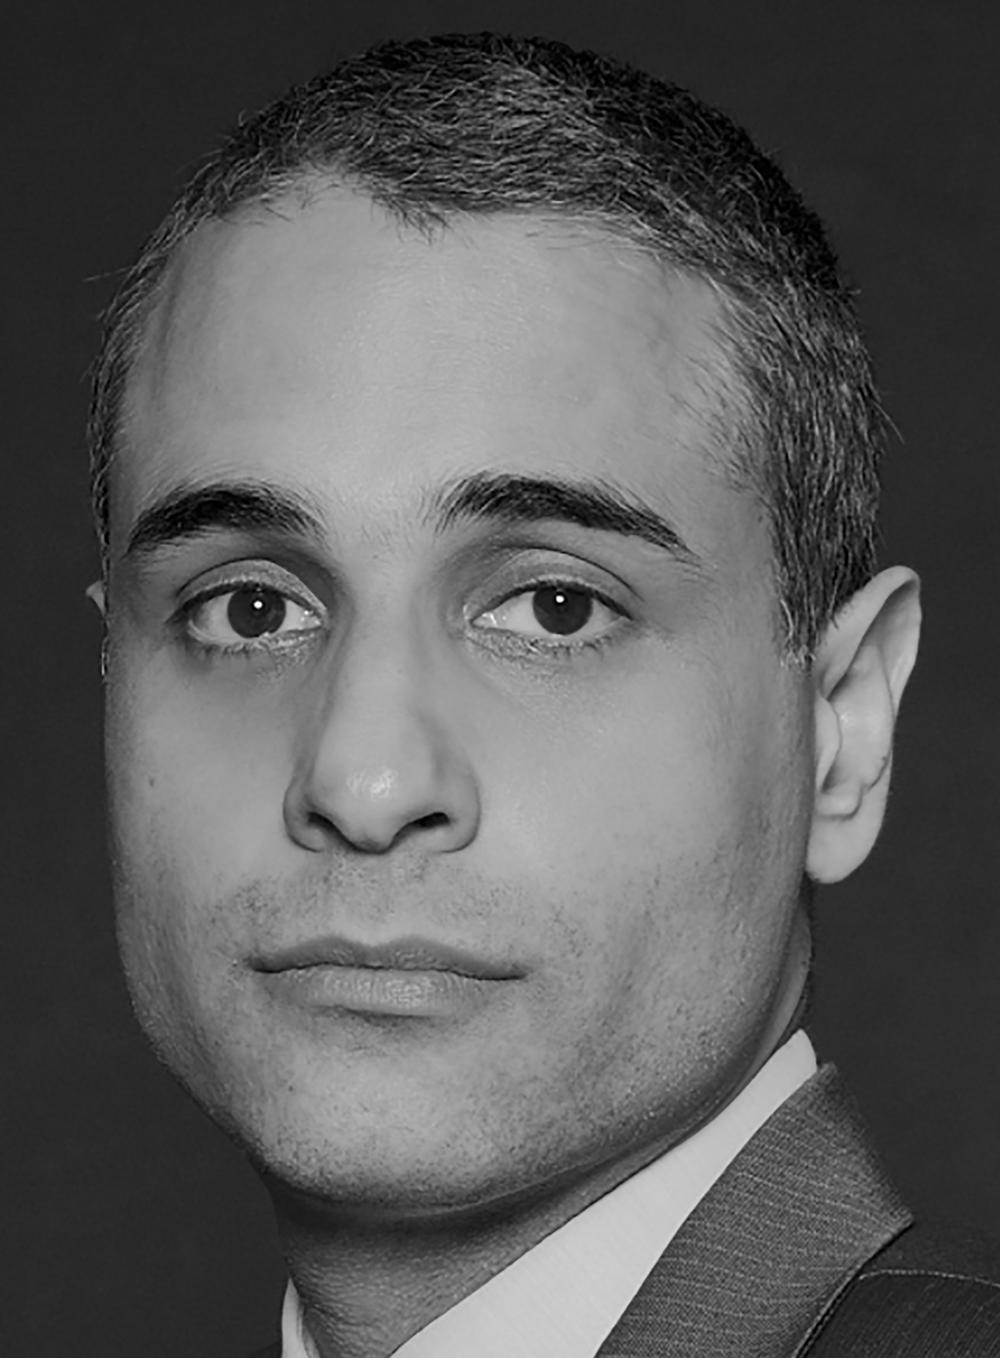 Siddharth Kara's previous book <em>Sex Trafficking: Inside the Business of Modern Slavery</em>, won the 2010 Frederick Douglass Book Prize, awarded for the best book written in English on slavery or abolition.